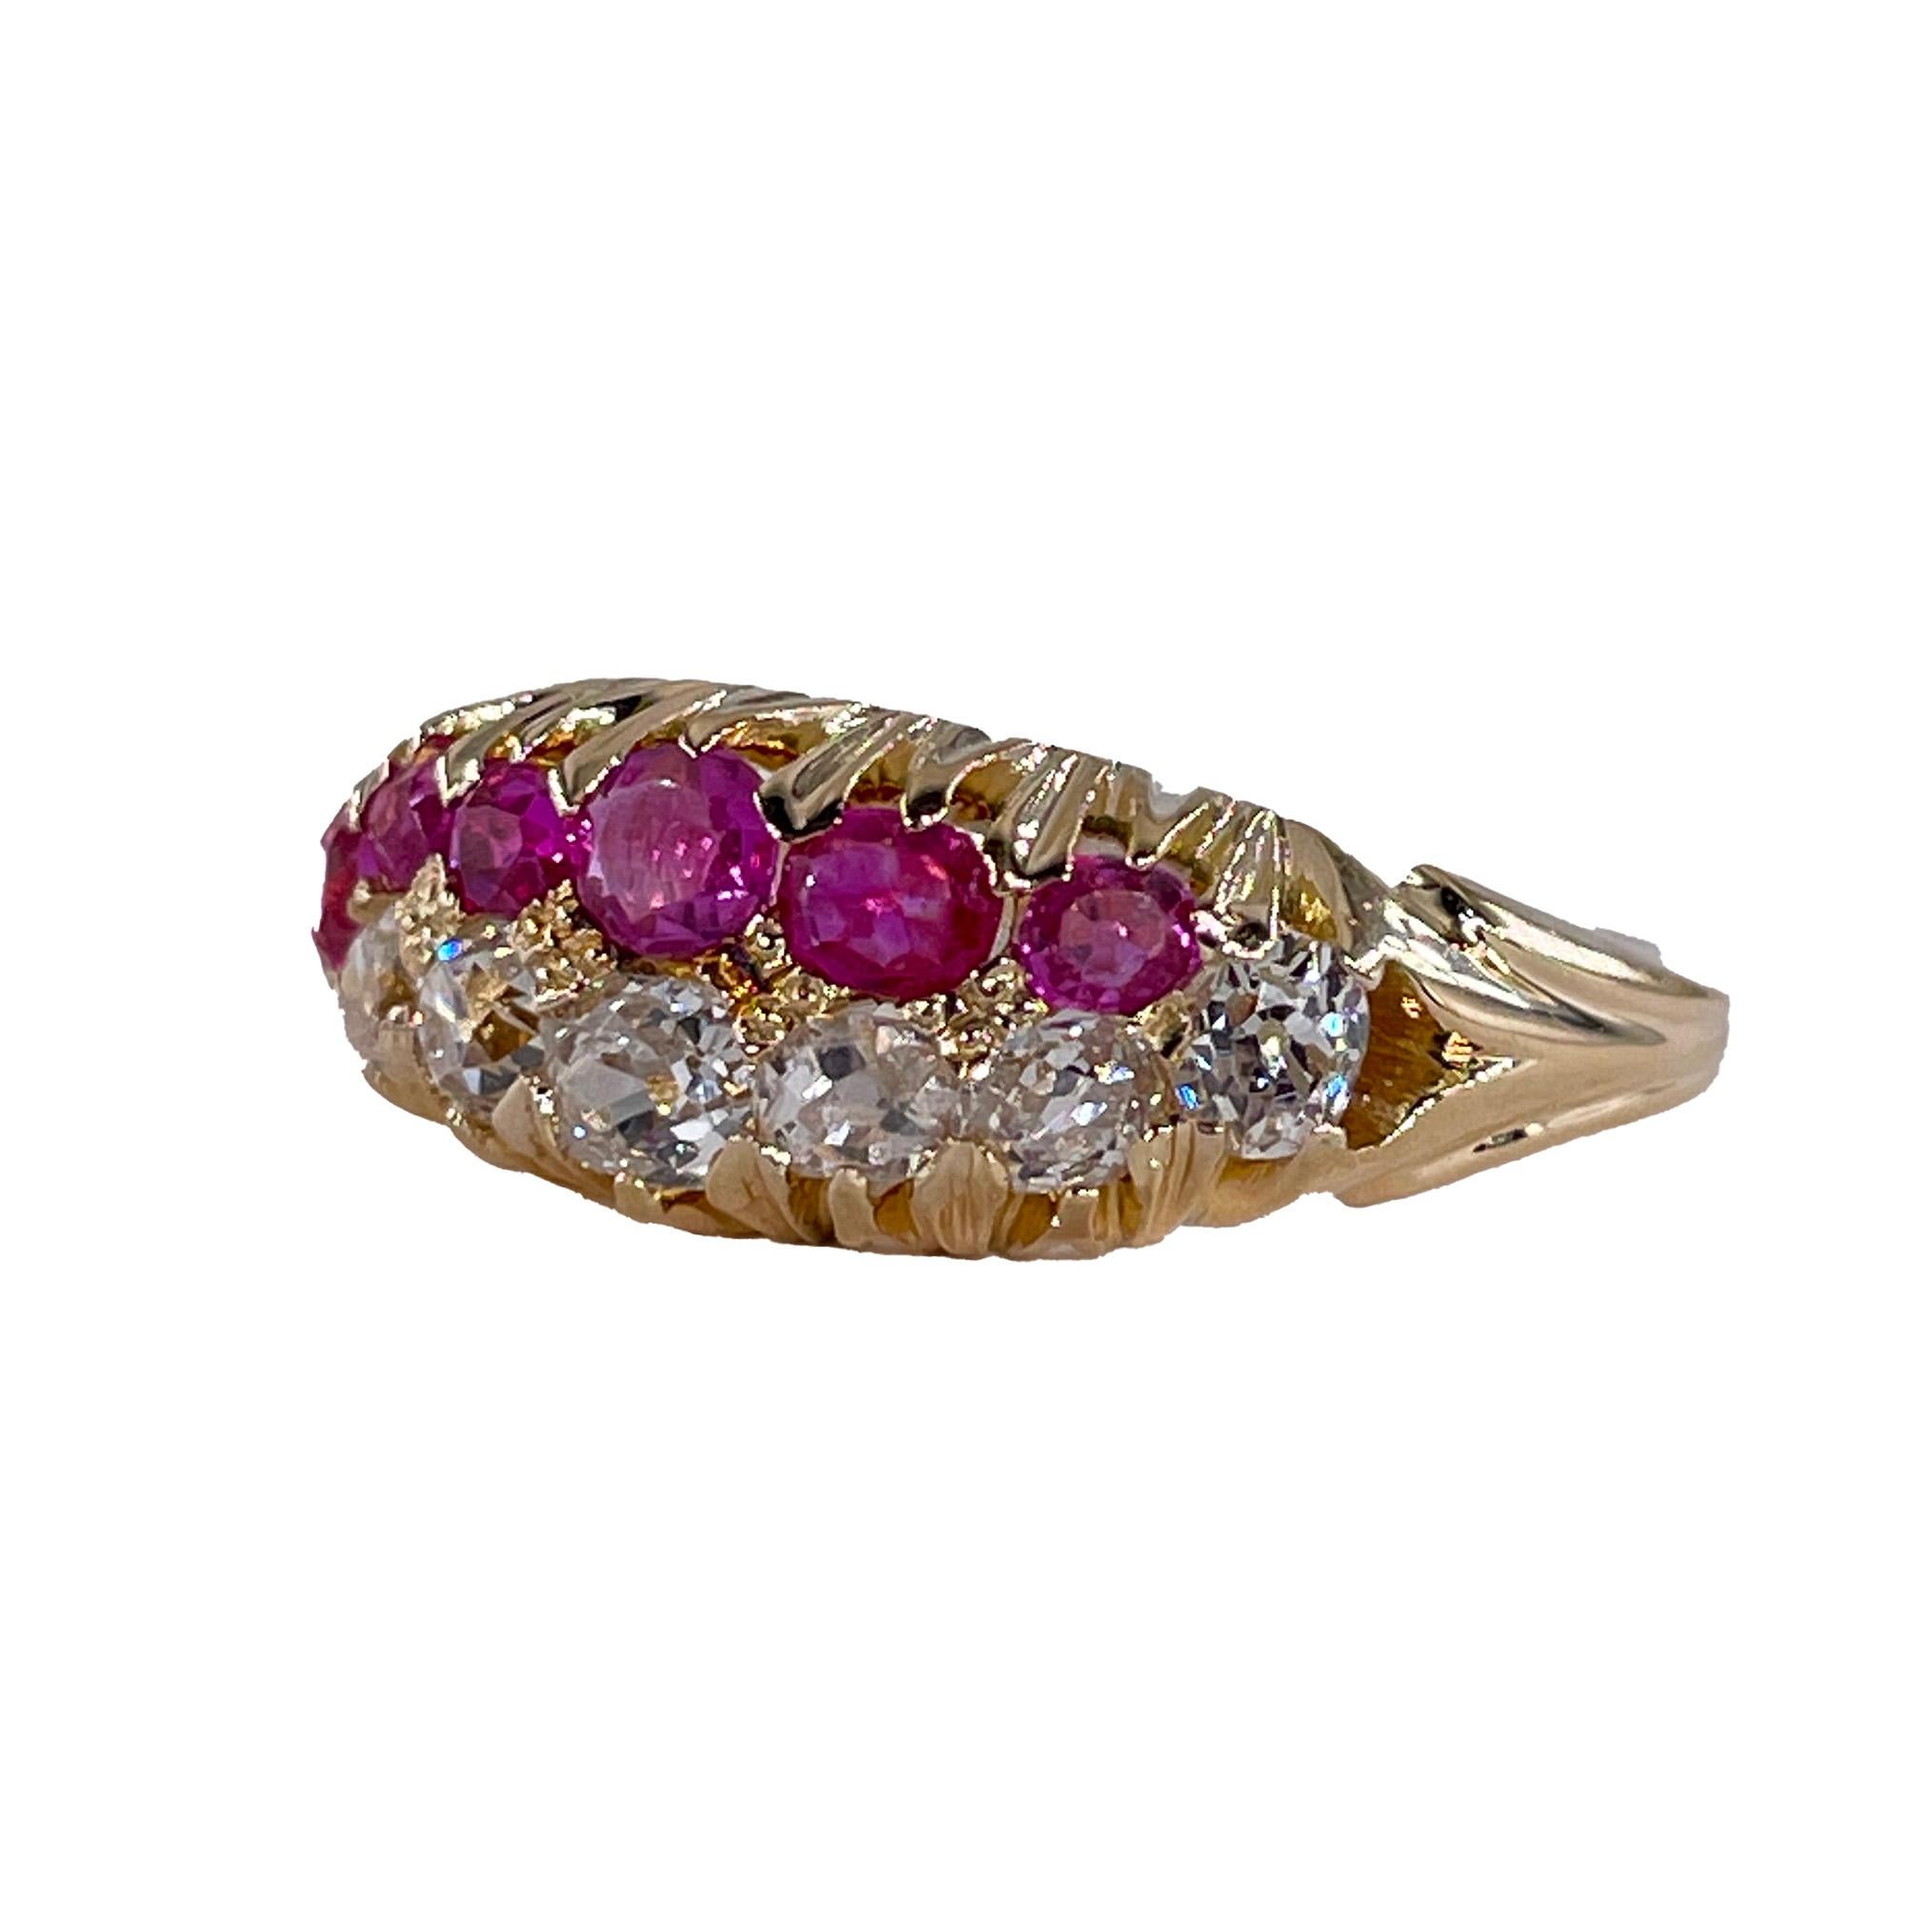 
Victorian English GIA 1.80ctw No-Heat Burmese Pink Sapphires & Old Mine Diamond Double Rows Engagement, Wedding Anniversary 16K Yellow Gold Band Ring
VALENTINE'S PERFECT GIFT IDEA!
Double your sparkle with this breathtakingly beautiful, shimmering,